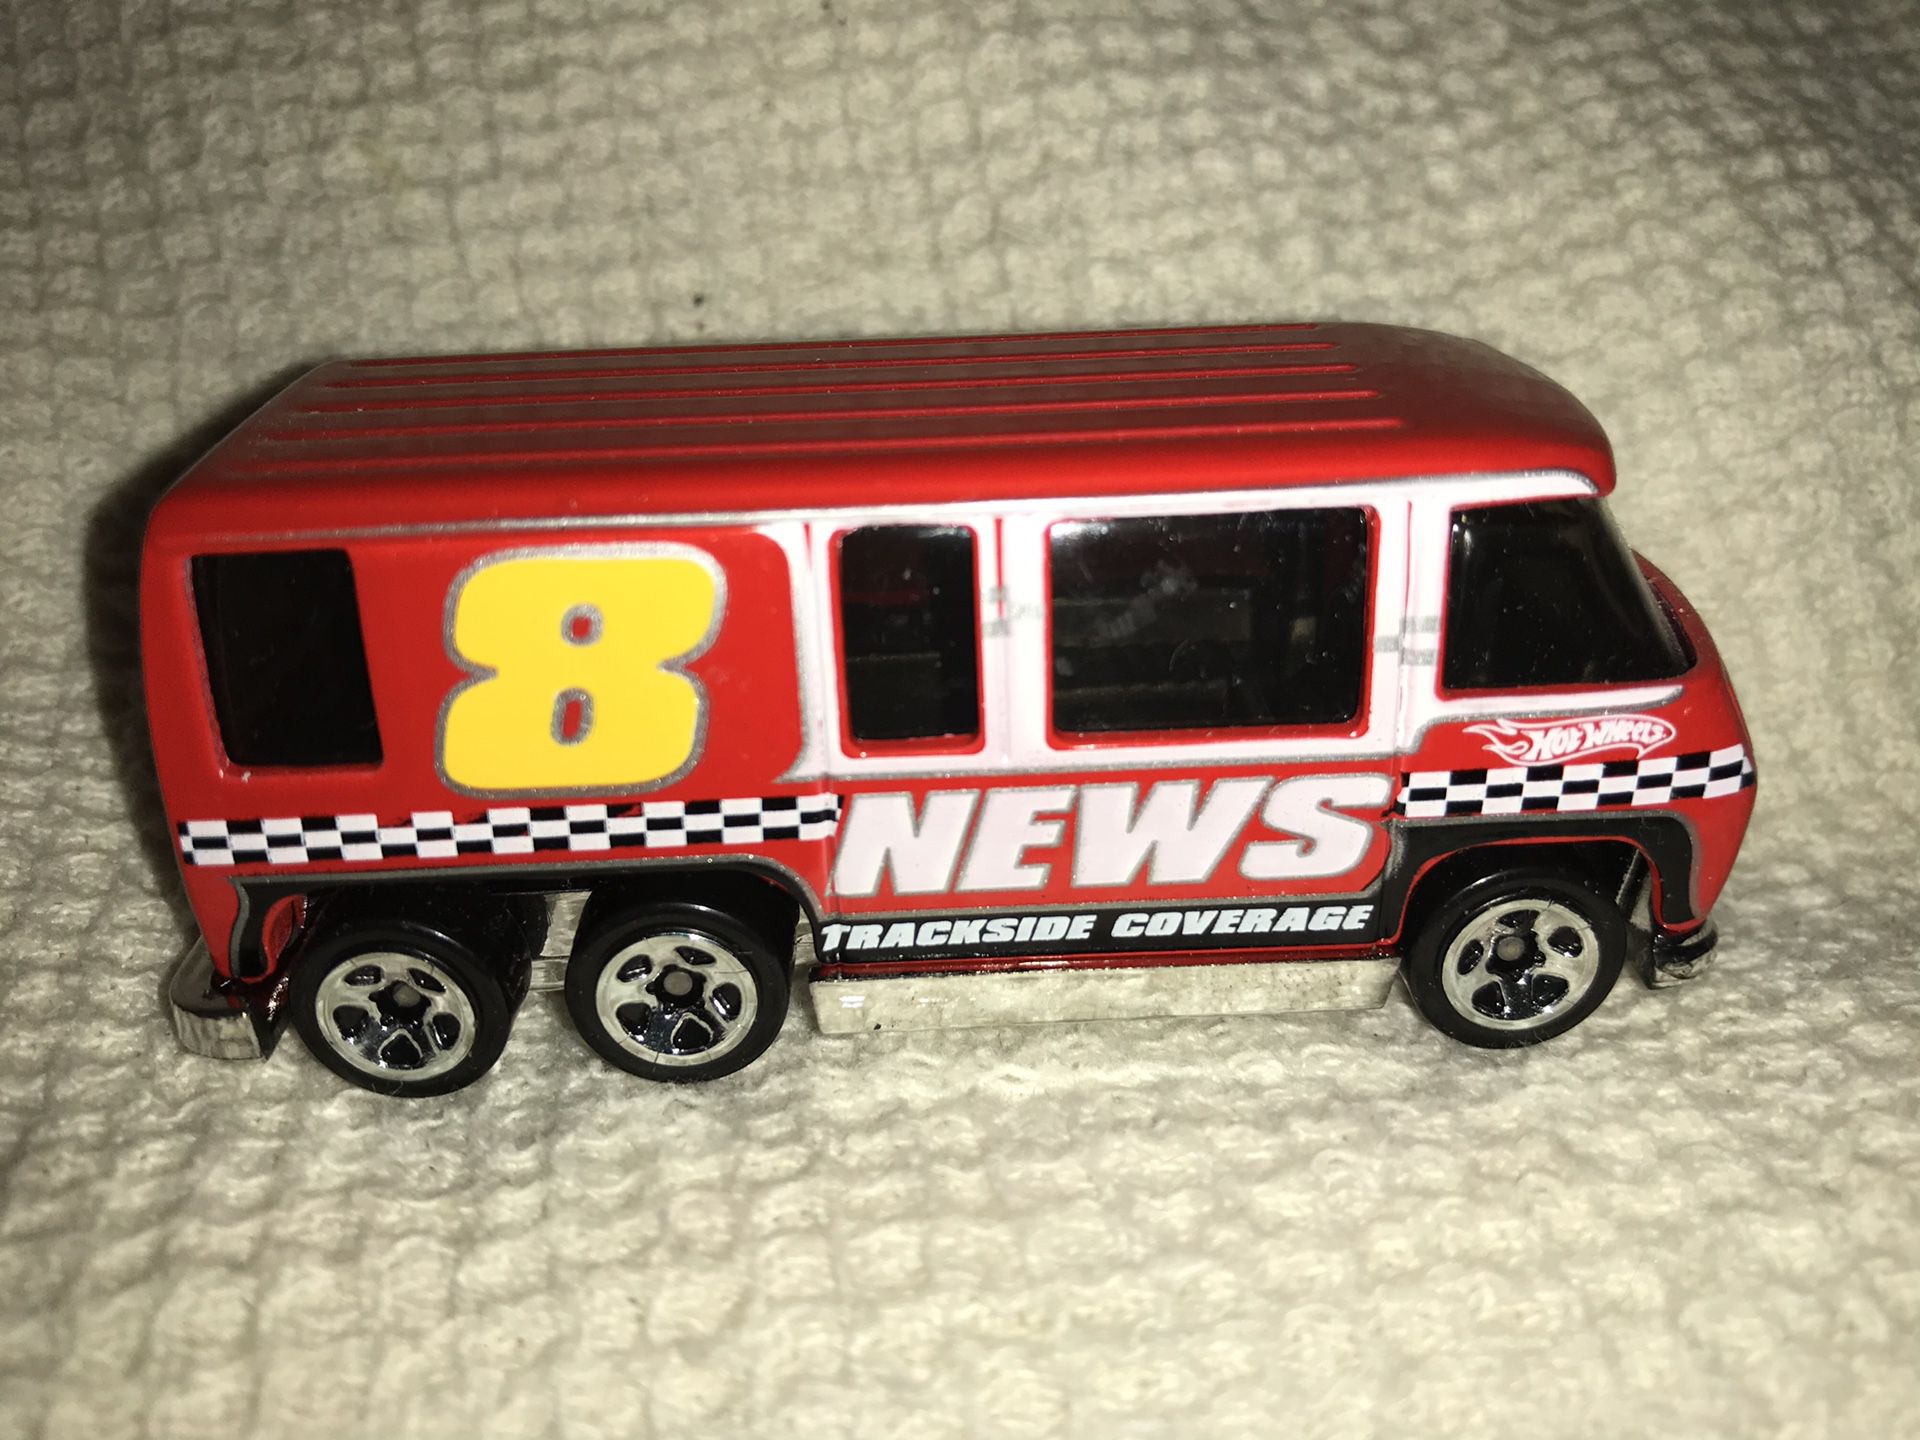 Hot Wheels 2011 GMC Motorhome Red Channel 8 News Trackside Coverage Van Thailand